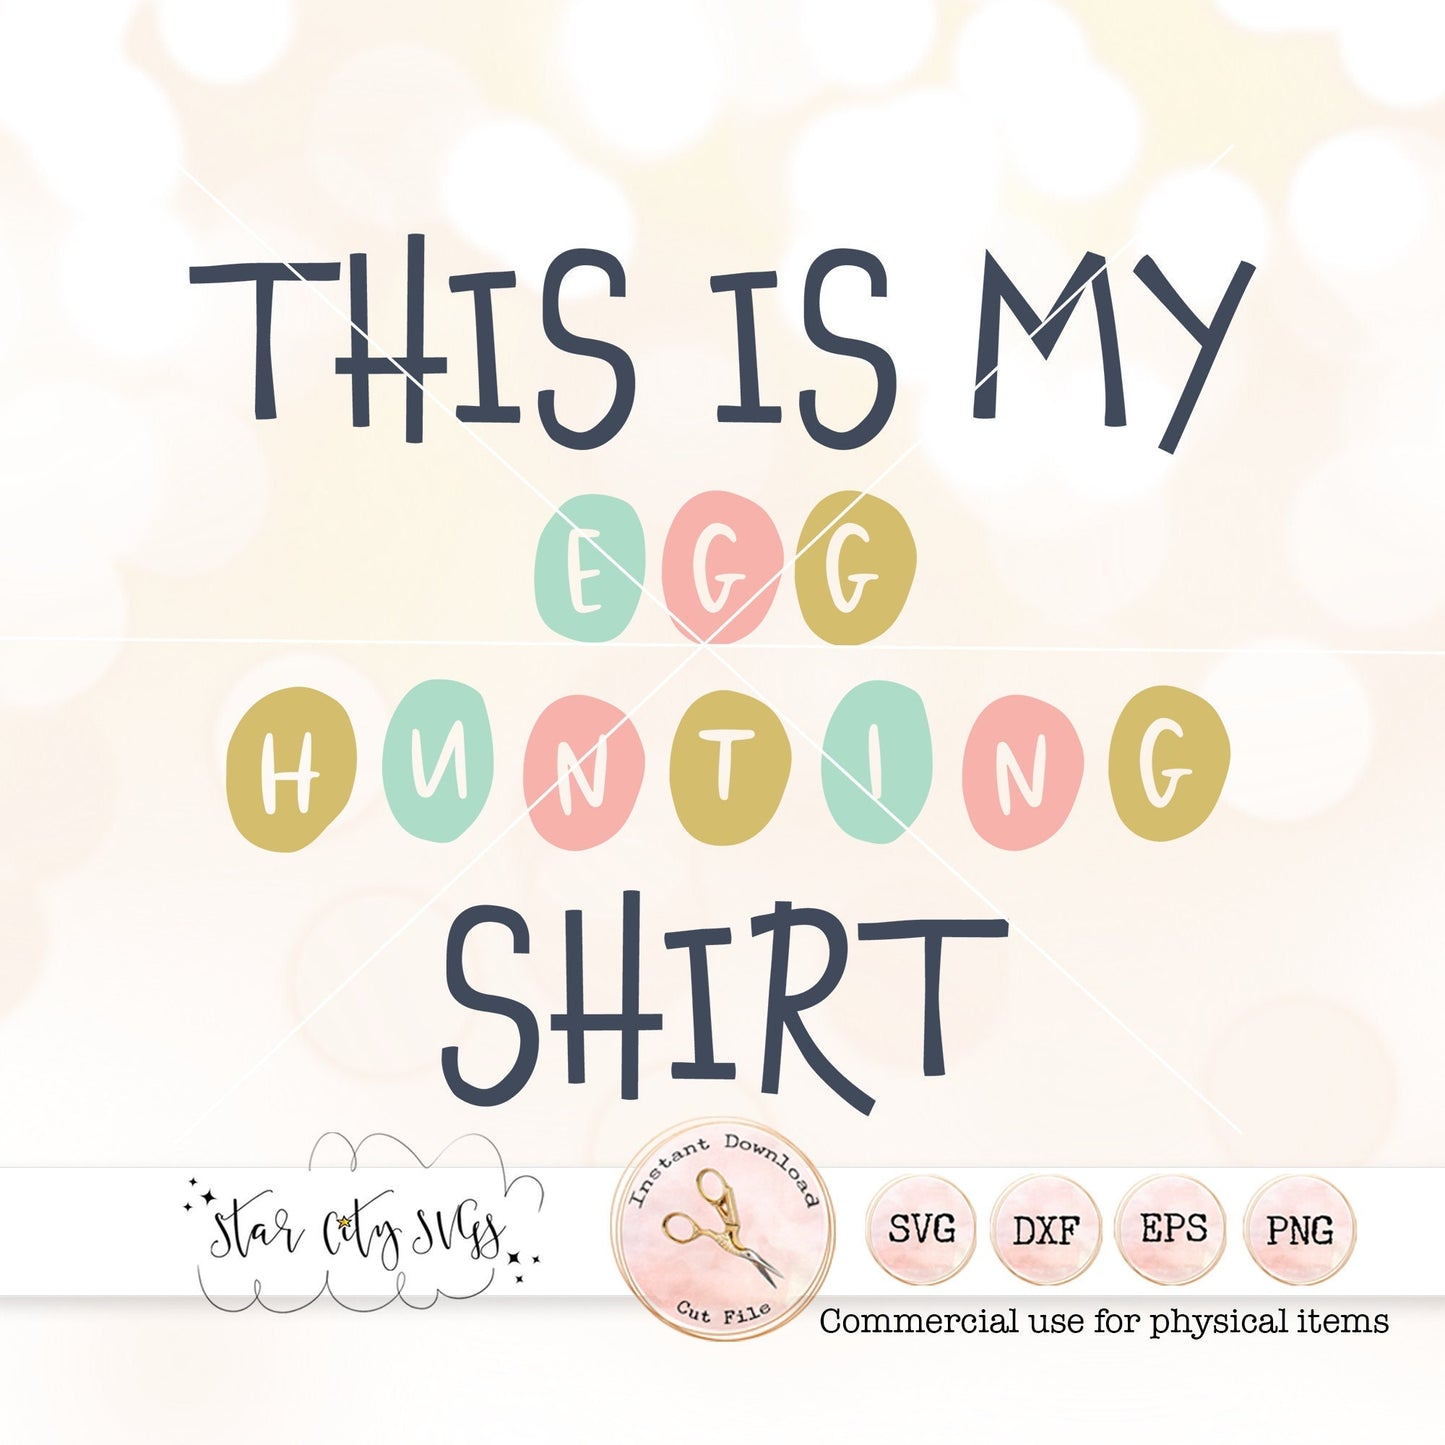 This my Egg Hunting Shirt - Easter SVG